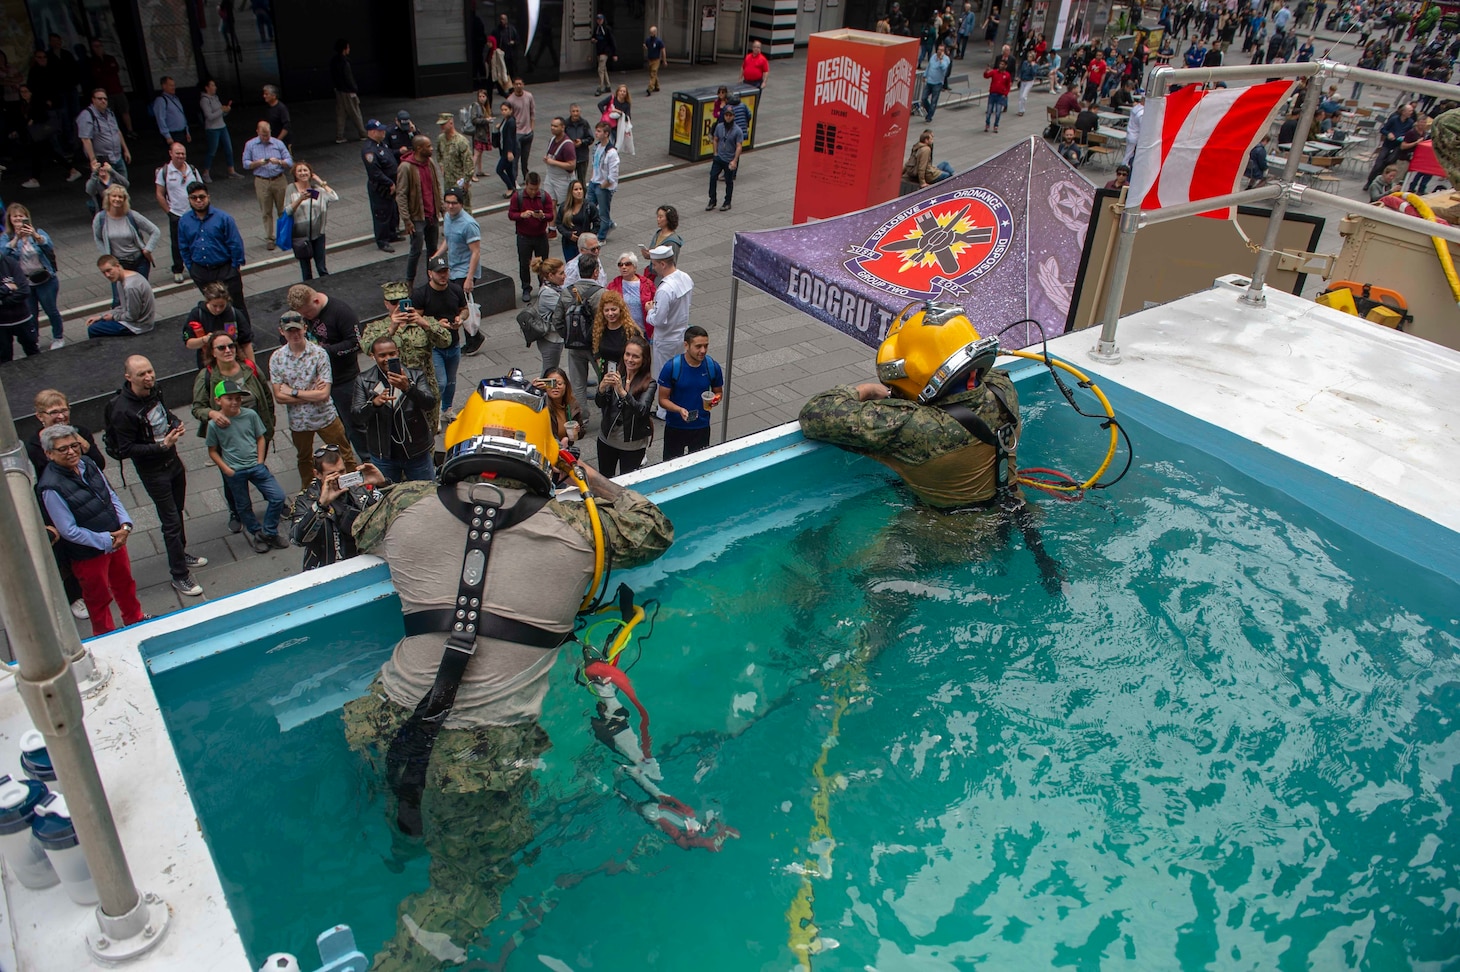 Two U.S. Navy divers pose for photos during a diving demonstration in Times Square as a part of Fleet Week New York.